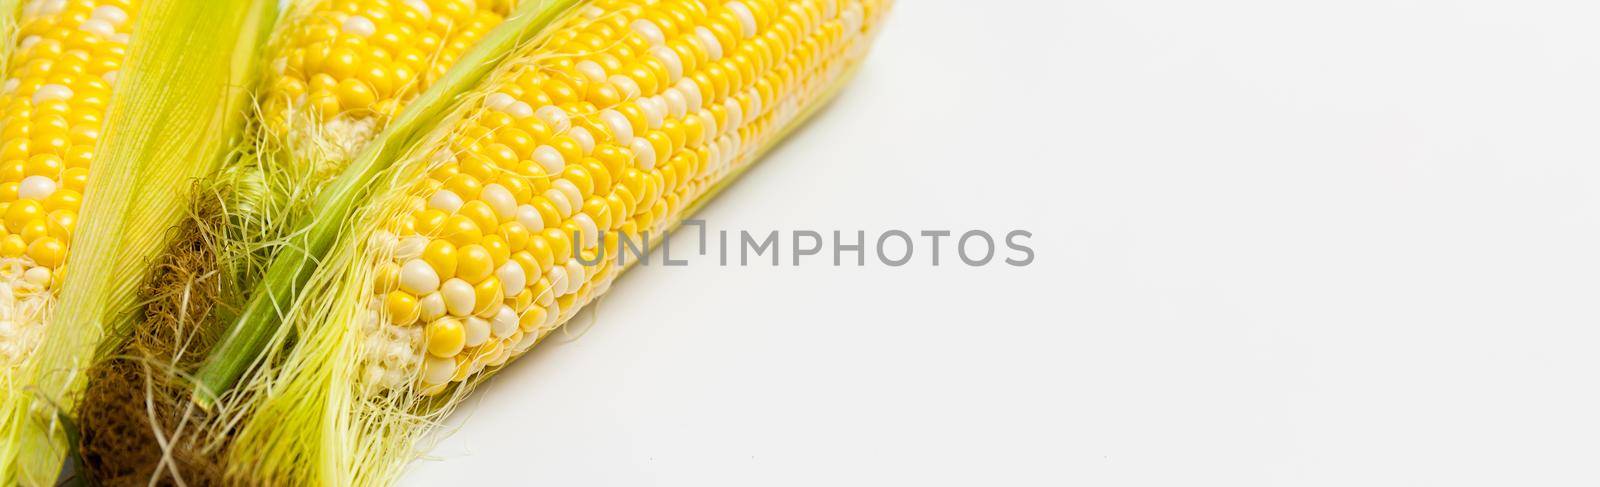 Grains of Ripe Corn with Water Droplets. Macro photo. Long banner for design, for text, for the site